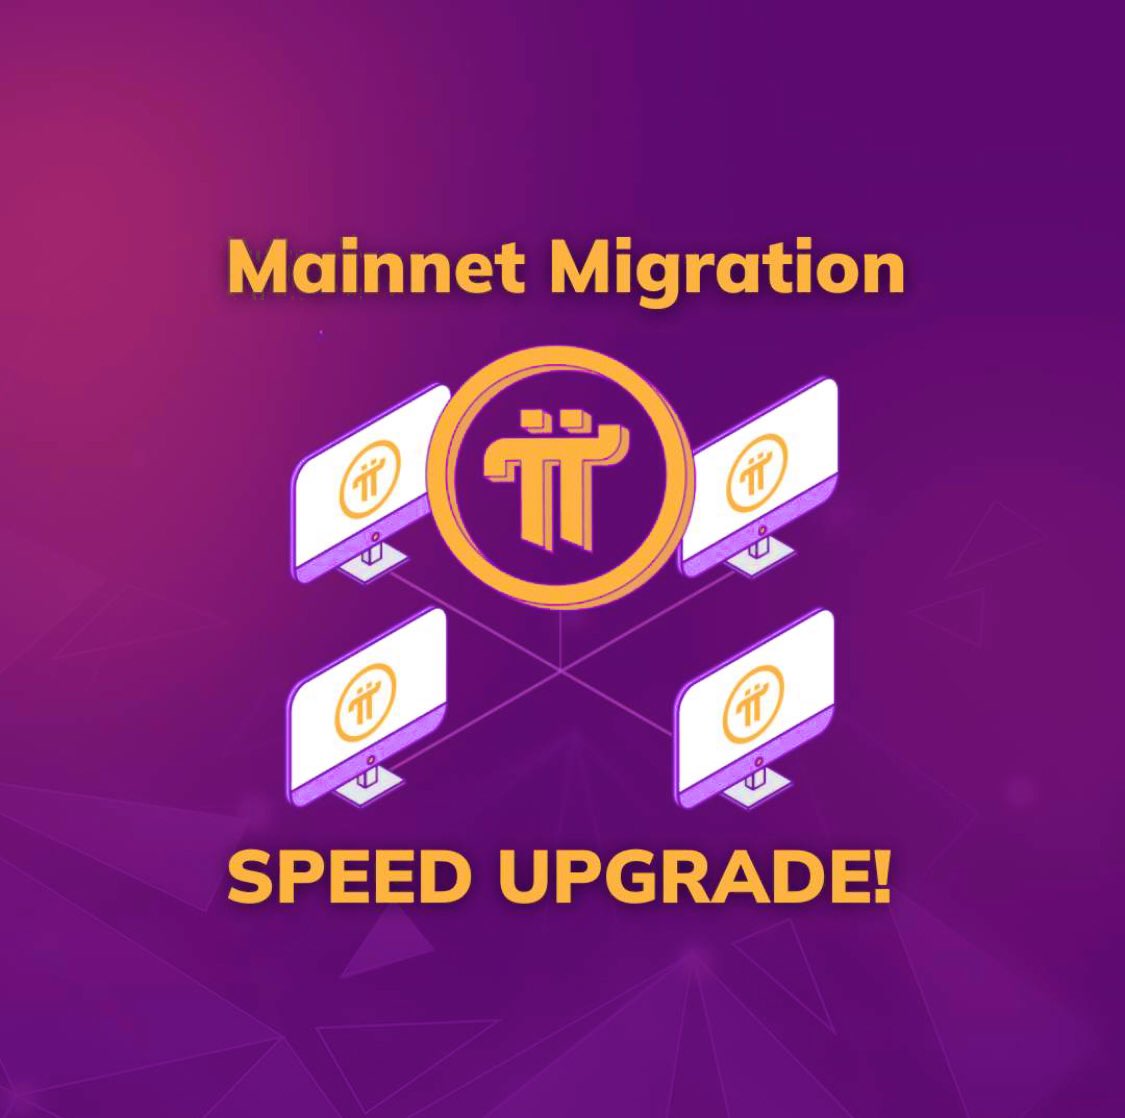 New update : We are thrilled to announce that the Core Team has made a major technical upgrade in the Mainnet migration mechanism that resulted in more than DOUBLE the speed at which Pioneers migrate to the Mainnet! #PiNetwork 🌐🔥